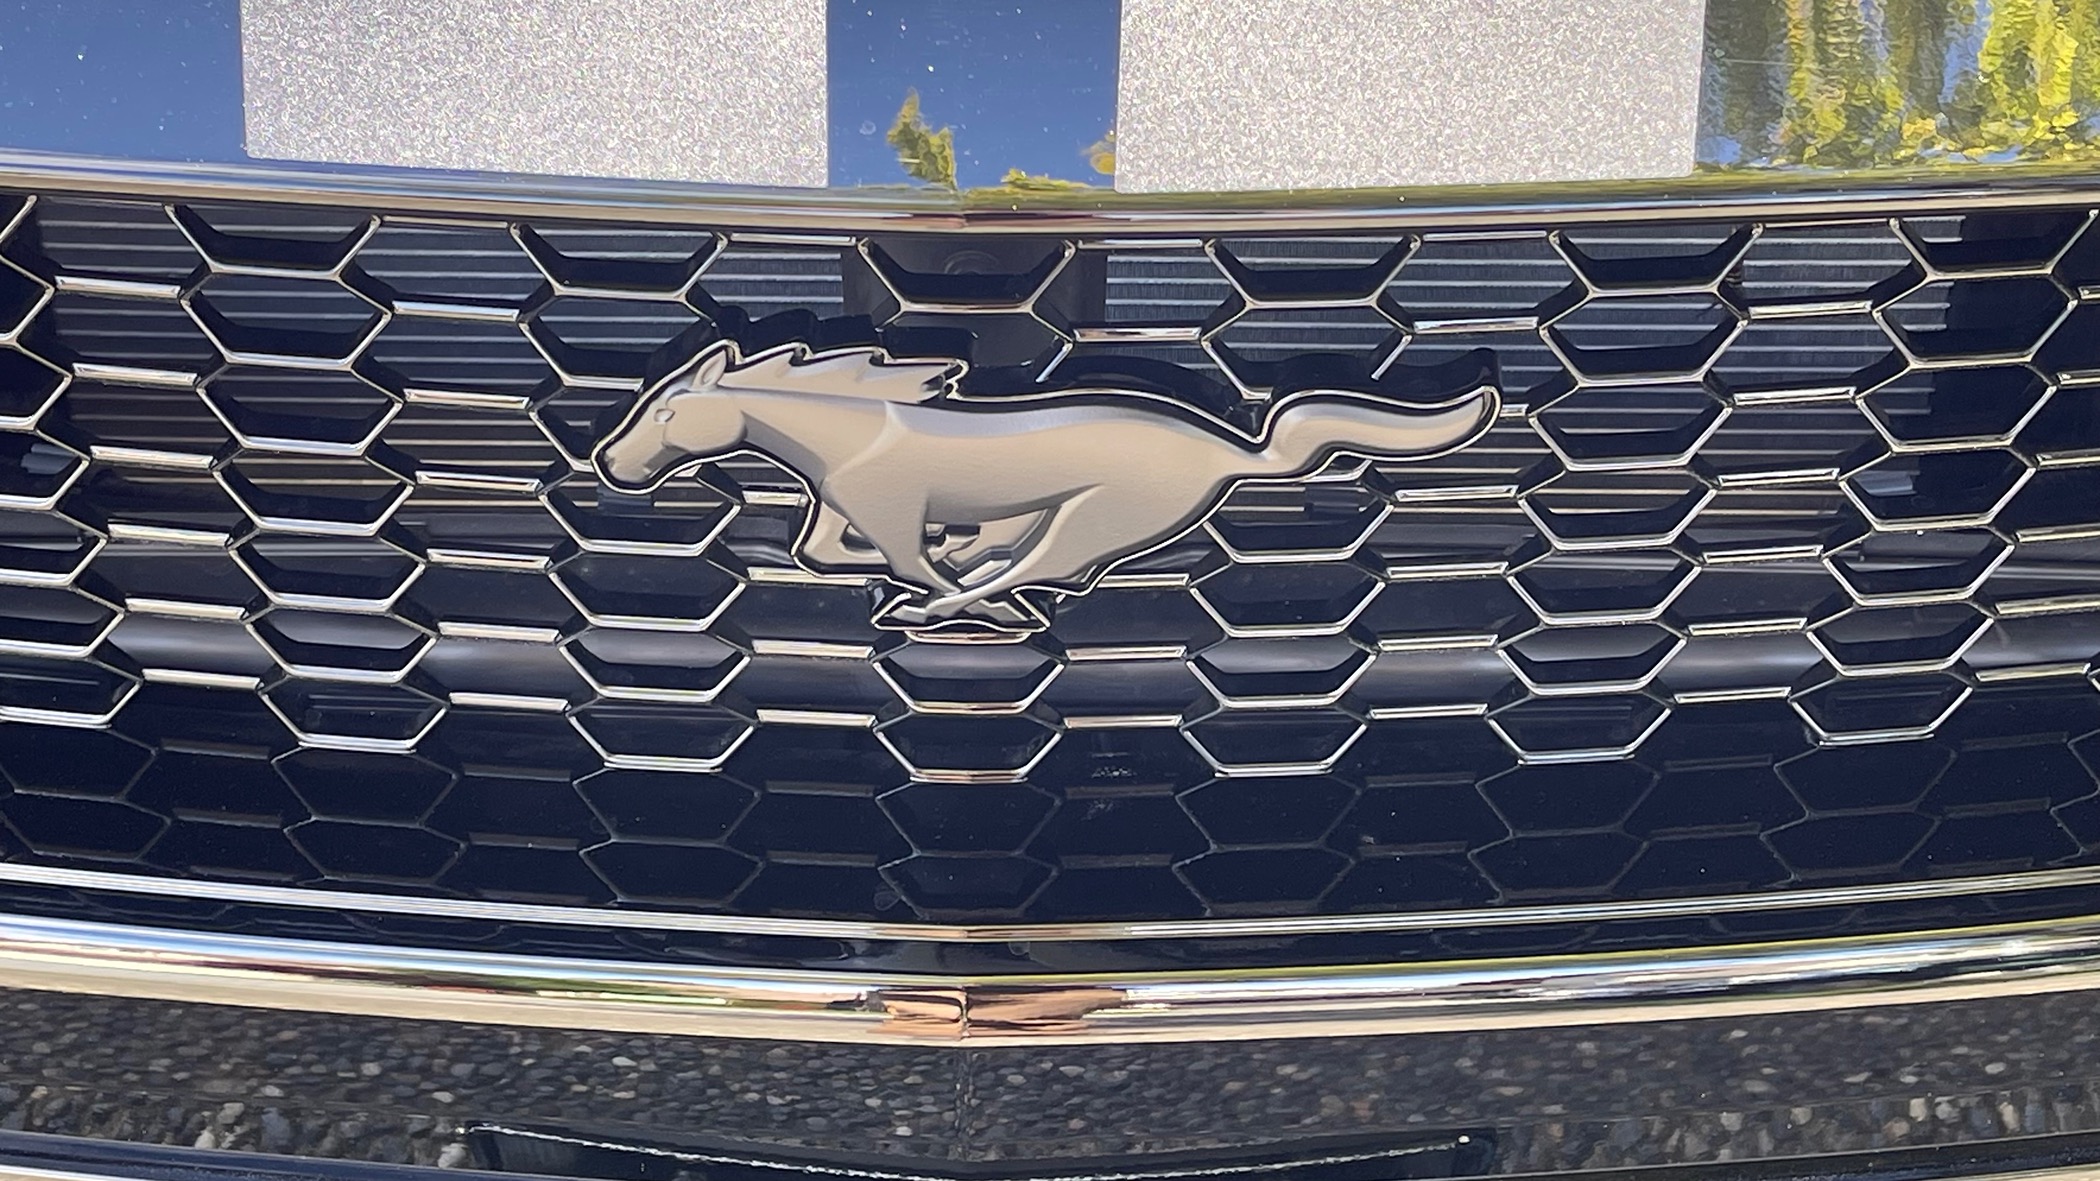 S650 Mustang Painted my emblems today… IMG_1990